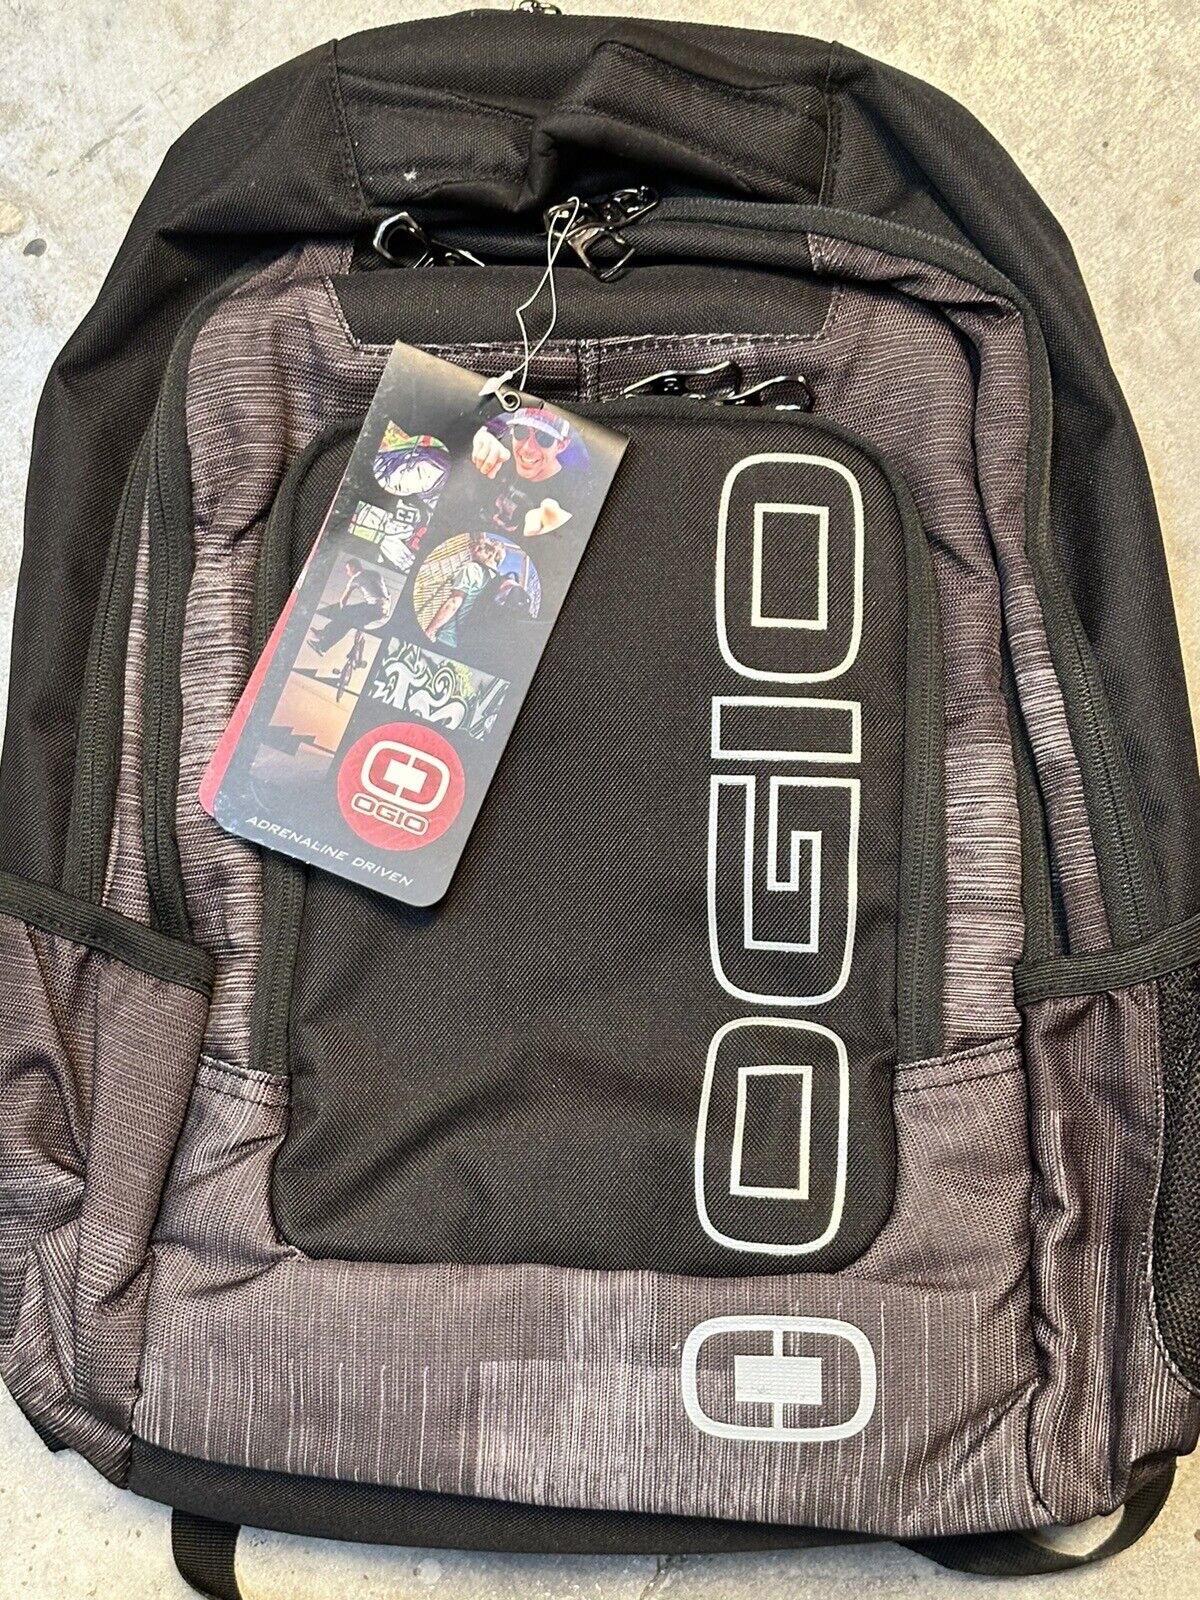 New Ogio Backpack Fits 17” Laptop Warehouse Overstock (new old stock)